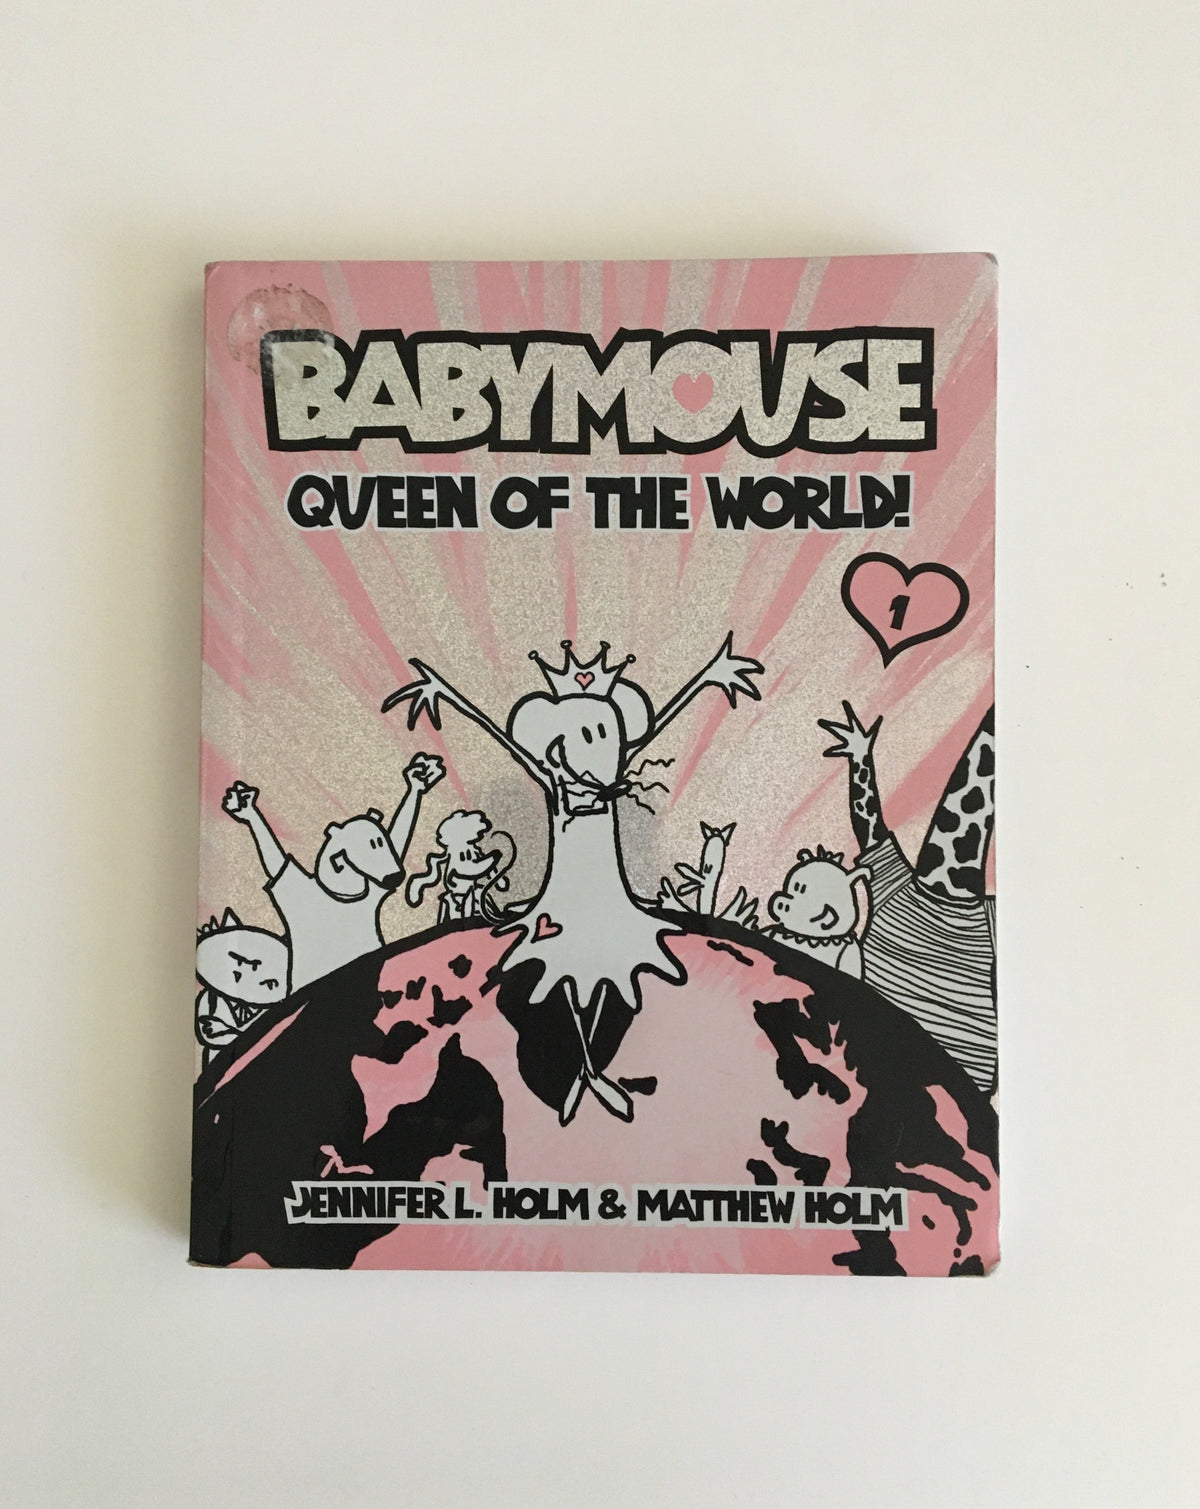 Babymouse: Queen of the World by Jennifer L. Holm &amp; Matthew Holm